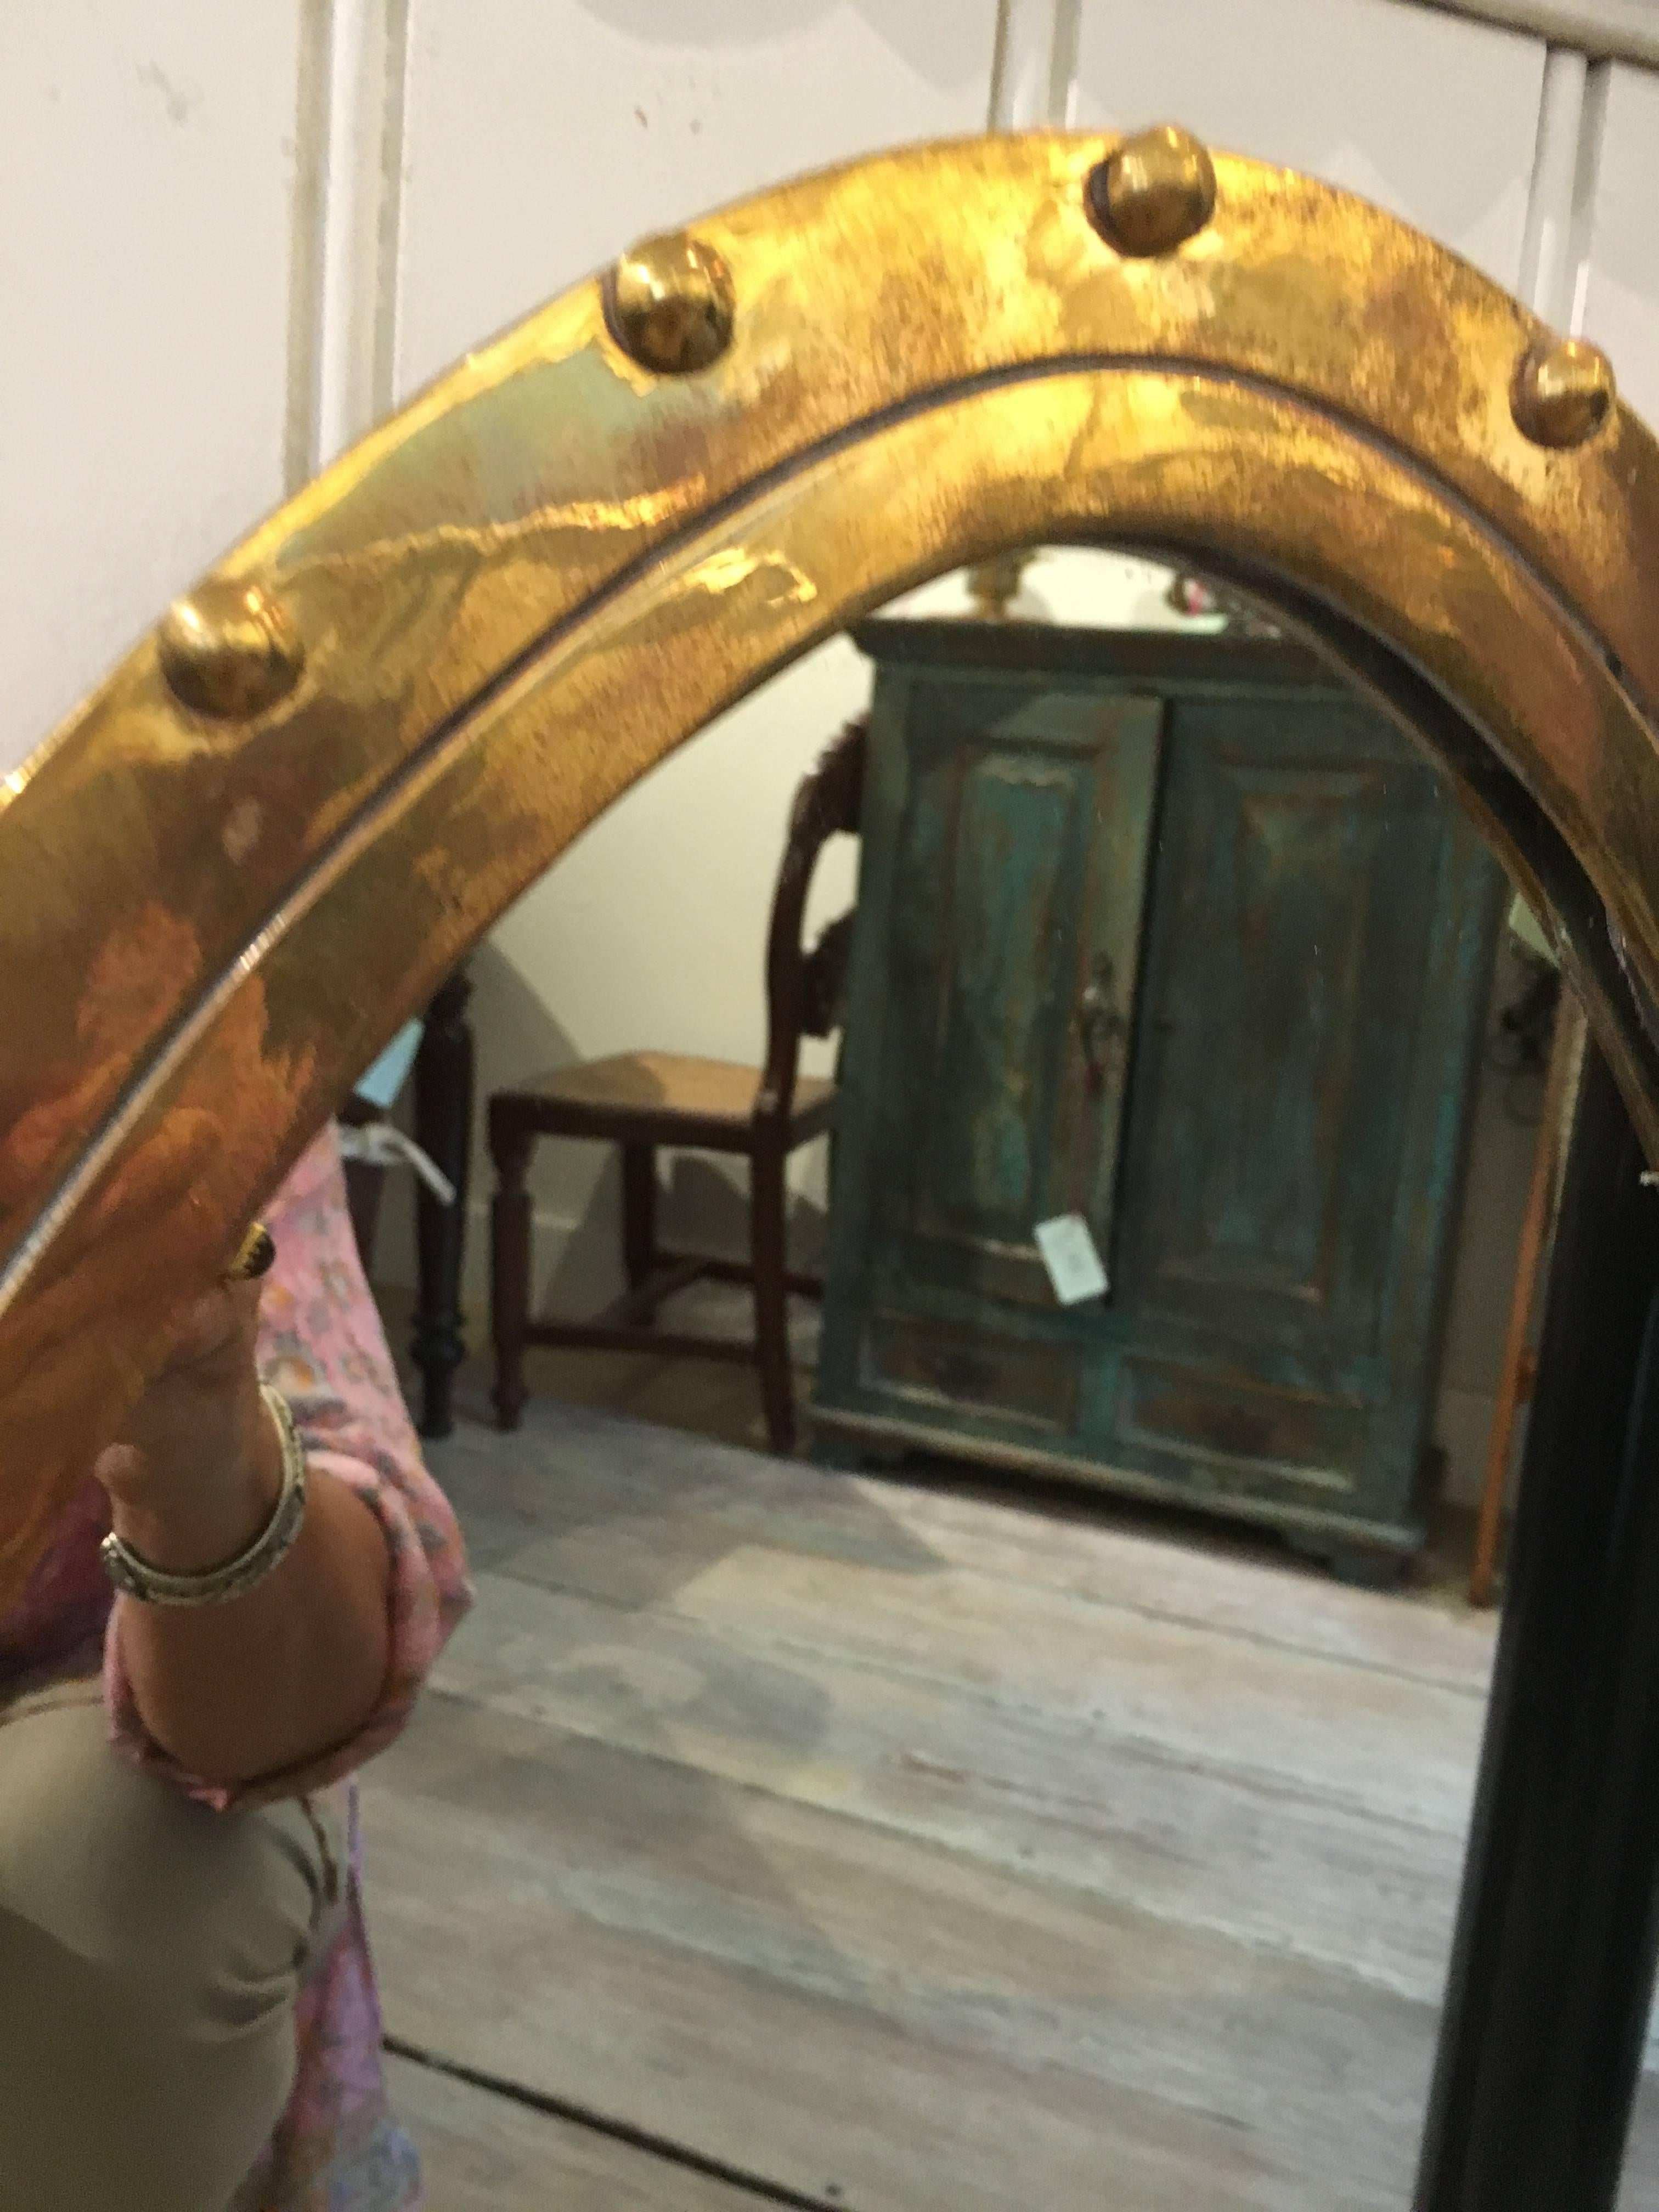 A great ovoid-shaped brass ship's window turned into a mirror. Originally salvaged from a ship's closed-type lifeboat from the 1970s. The glass has been swapped for a mirror and the rivets have been put back in. Brackets added to the back along with